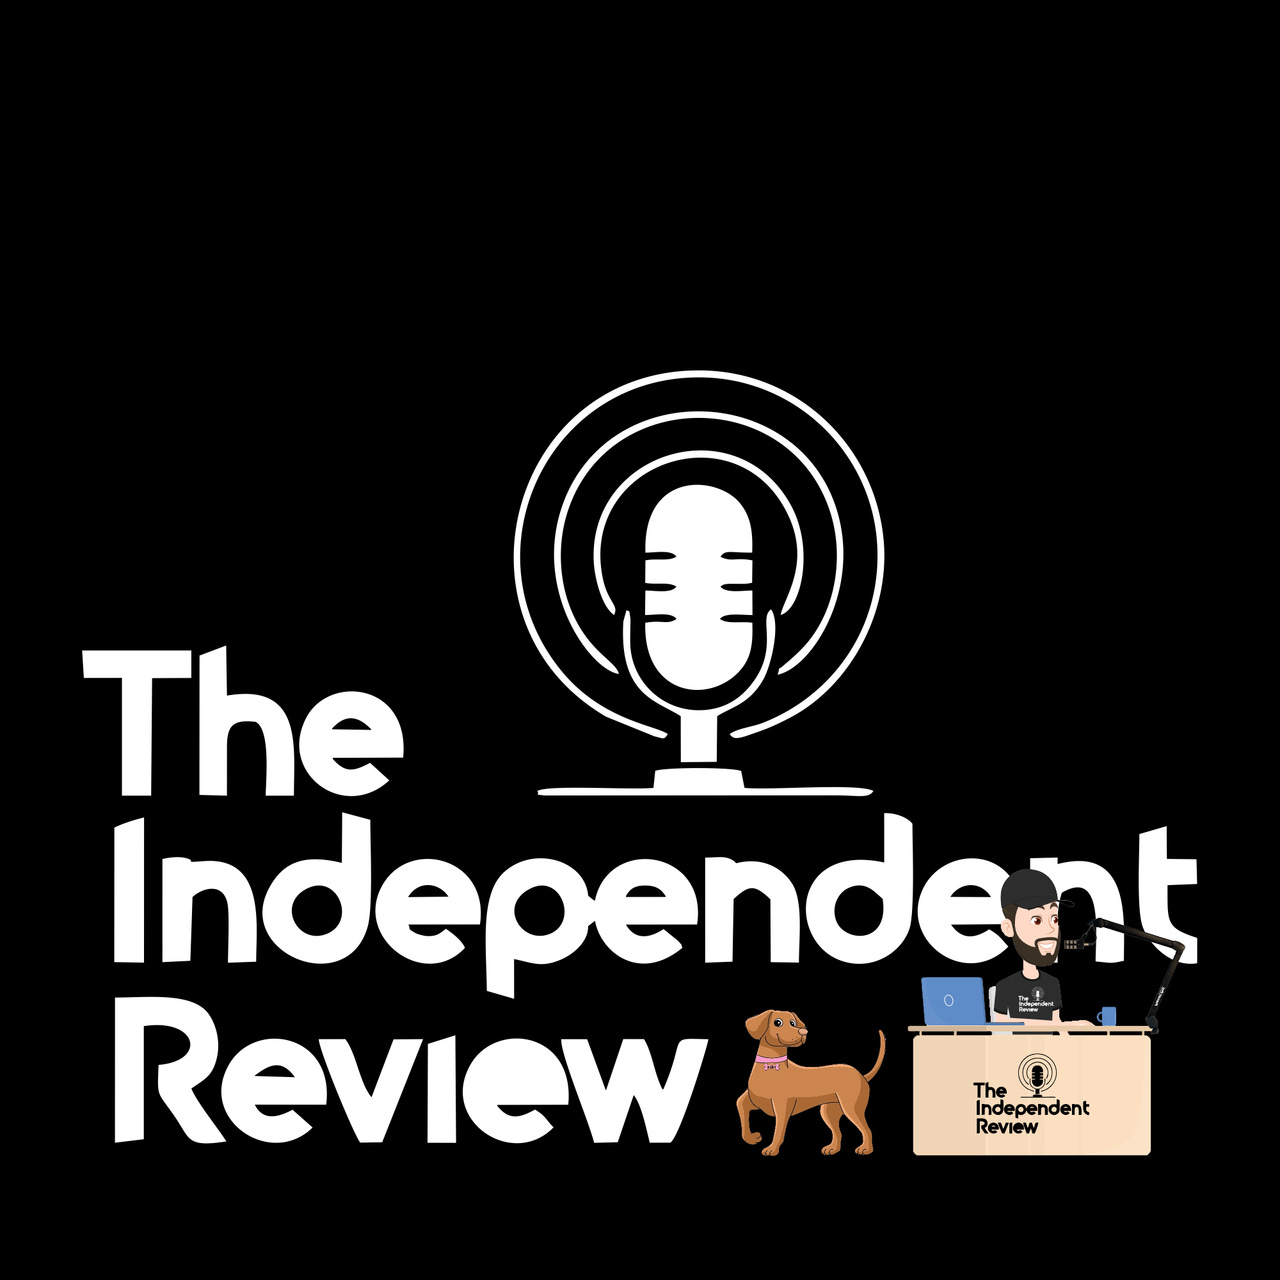 The Independent Review